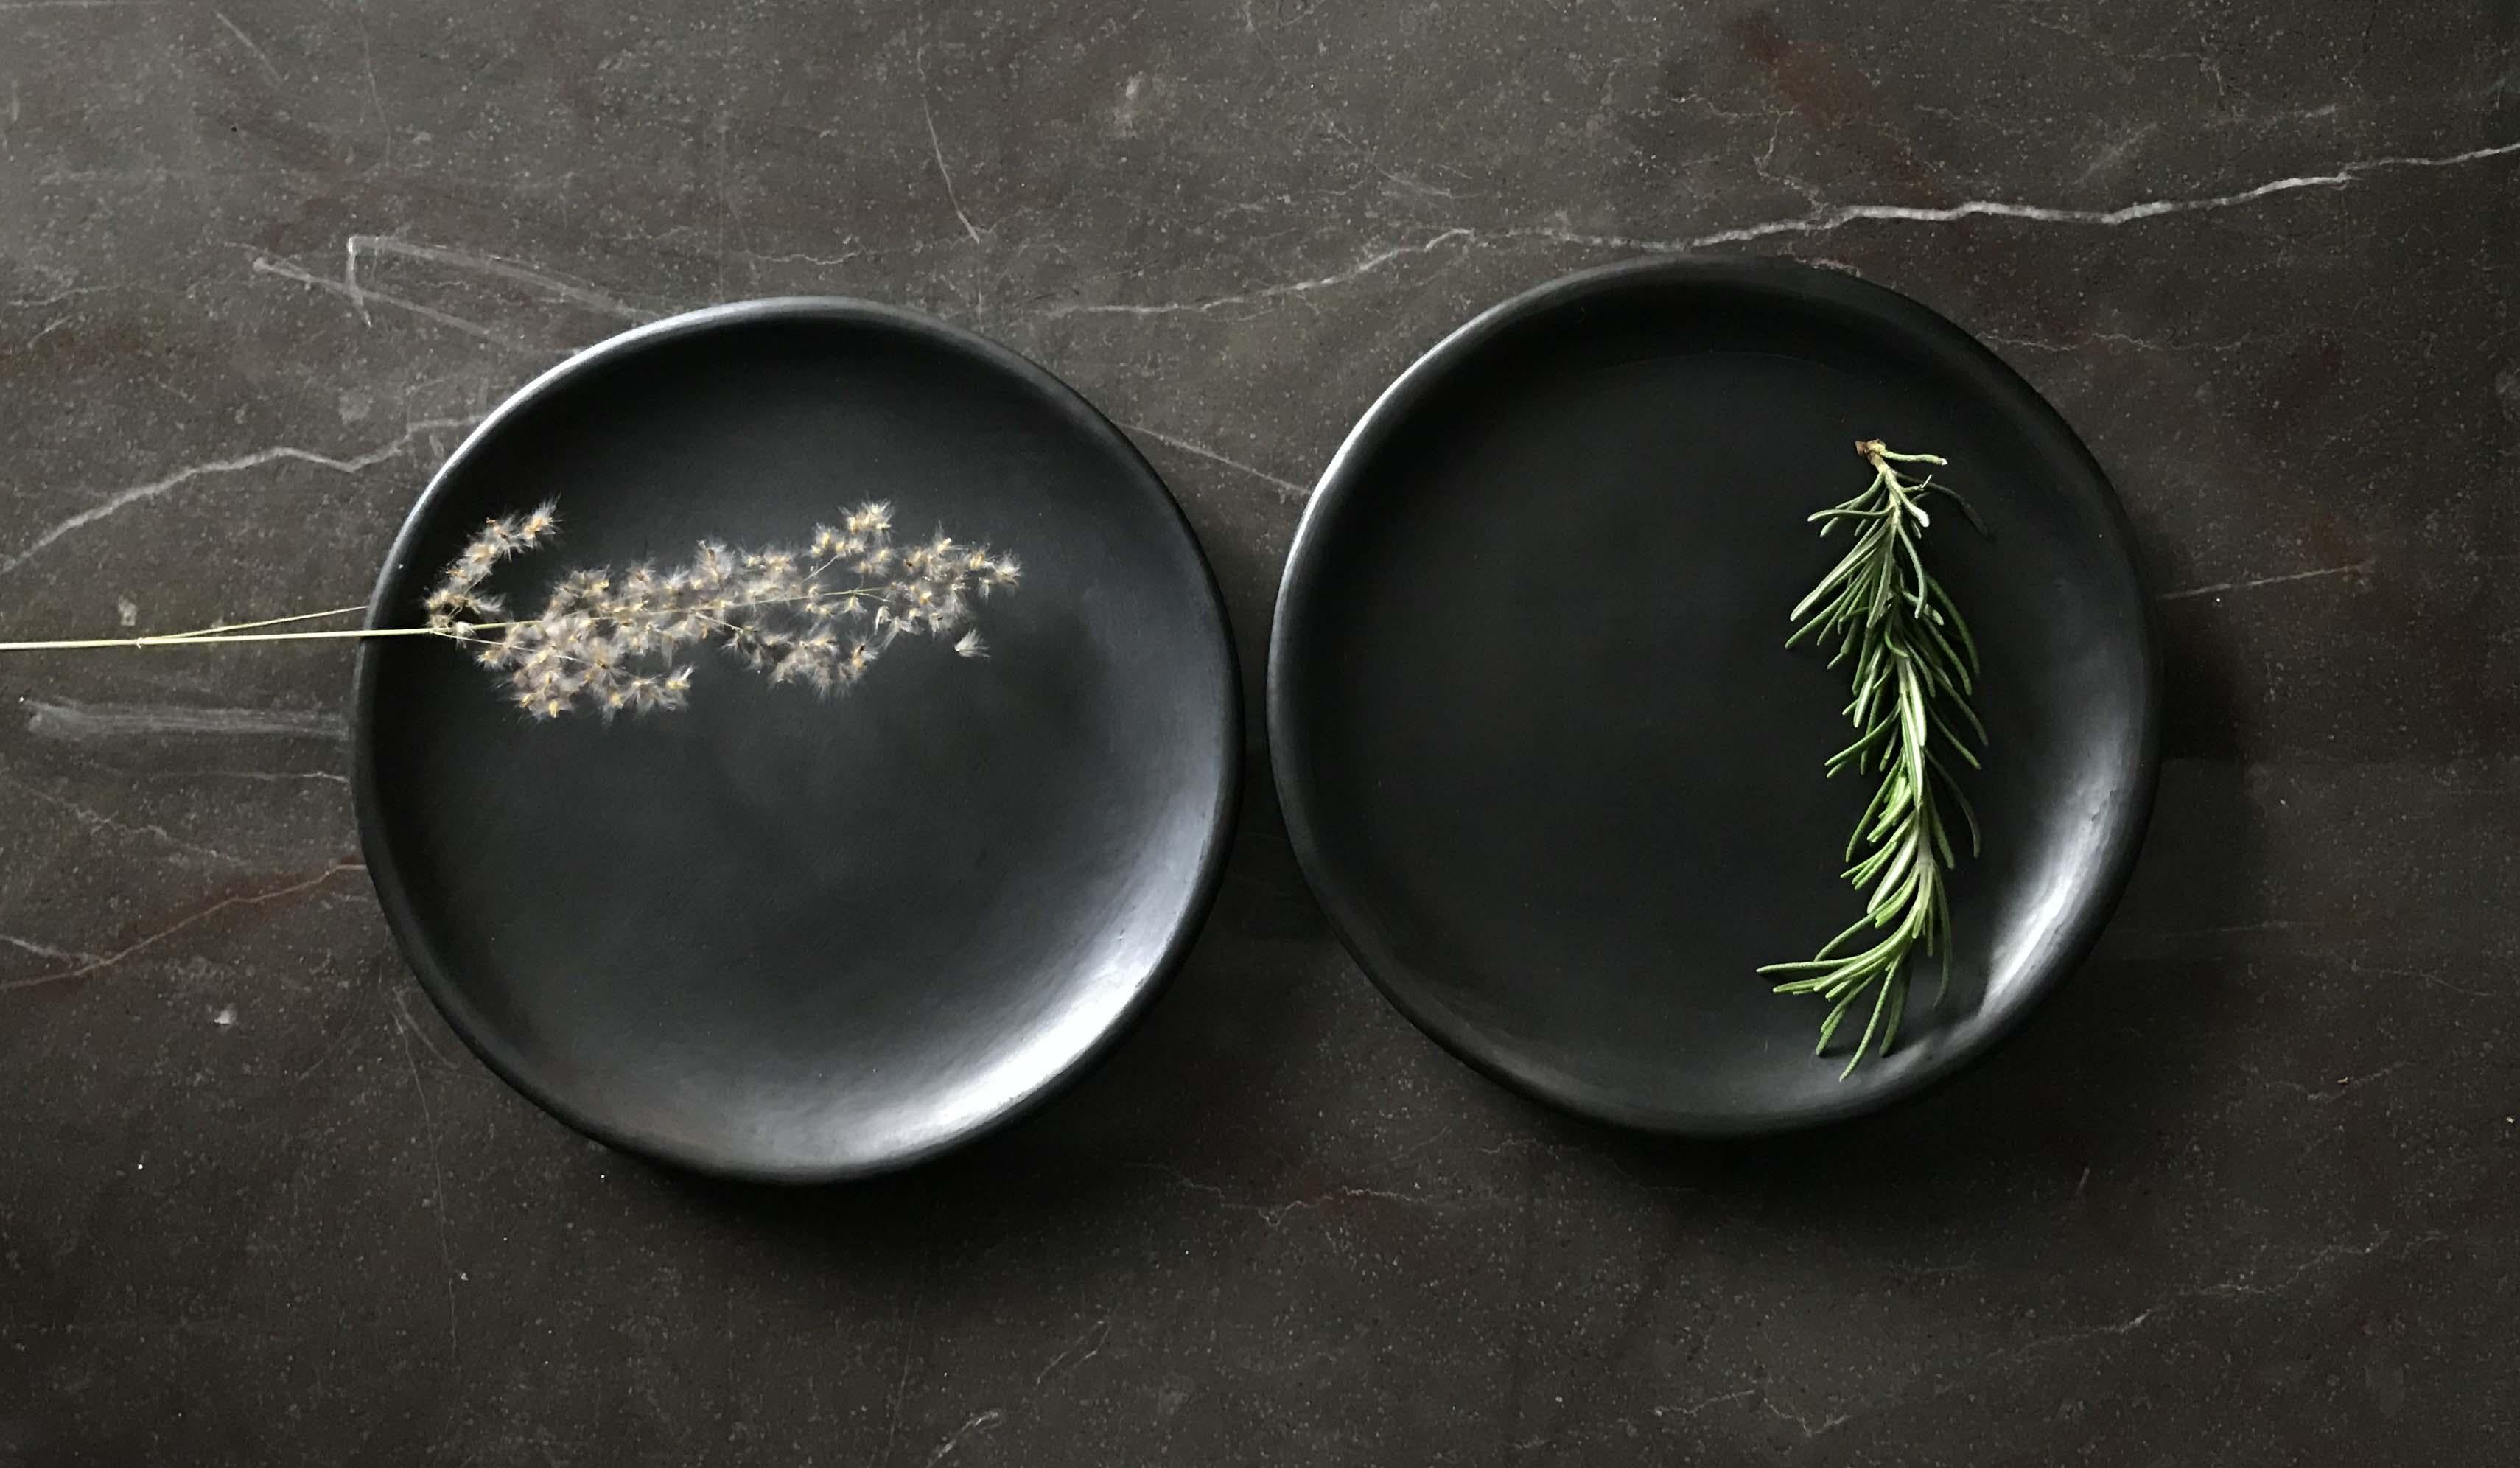 Oaxacan black clay 15cm plates handmade tableware burnished barro negro Oaxaca. Set of 4 pieces 

The soft and rich colour makes this side plate a stylish partner to bread, butter or more spectacular starters.

Handmade in Oaxaca, a state rich in